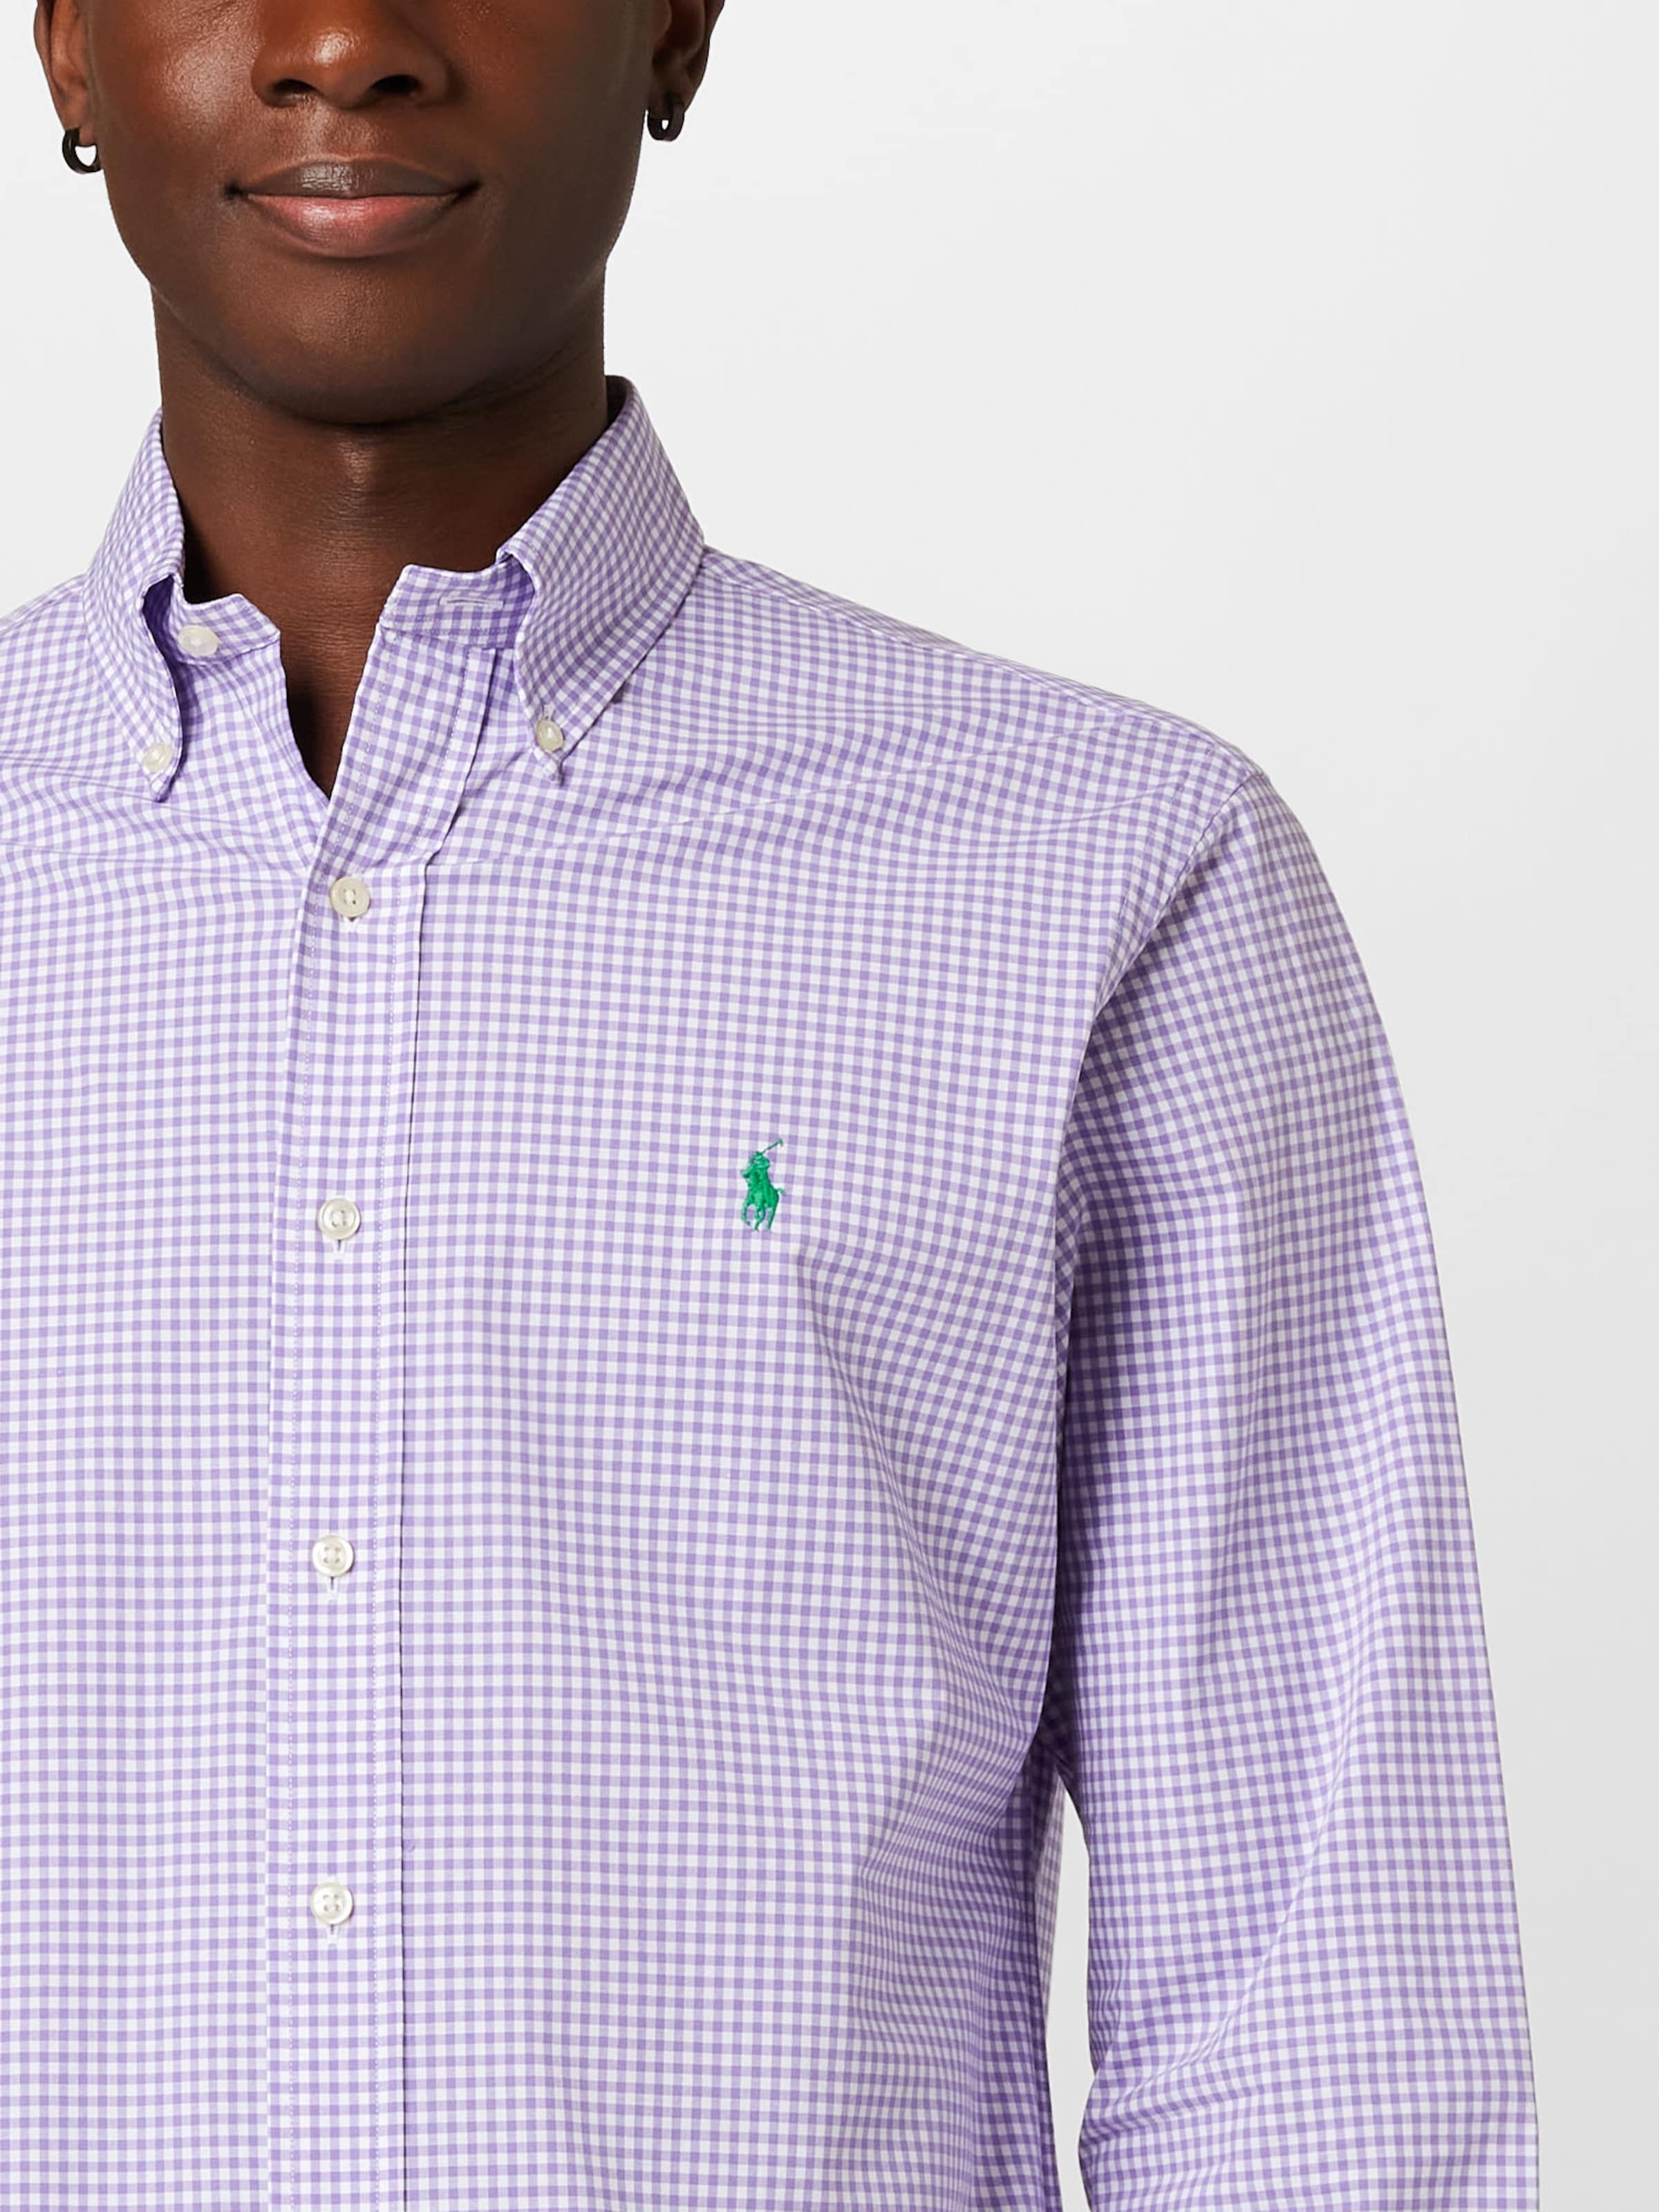 Polo Ralph Lauren Button Up Shirt in Lavender | ABOUT YOU